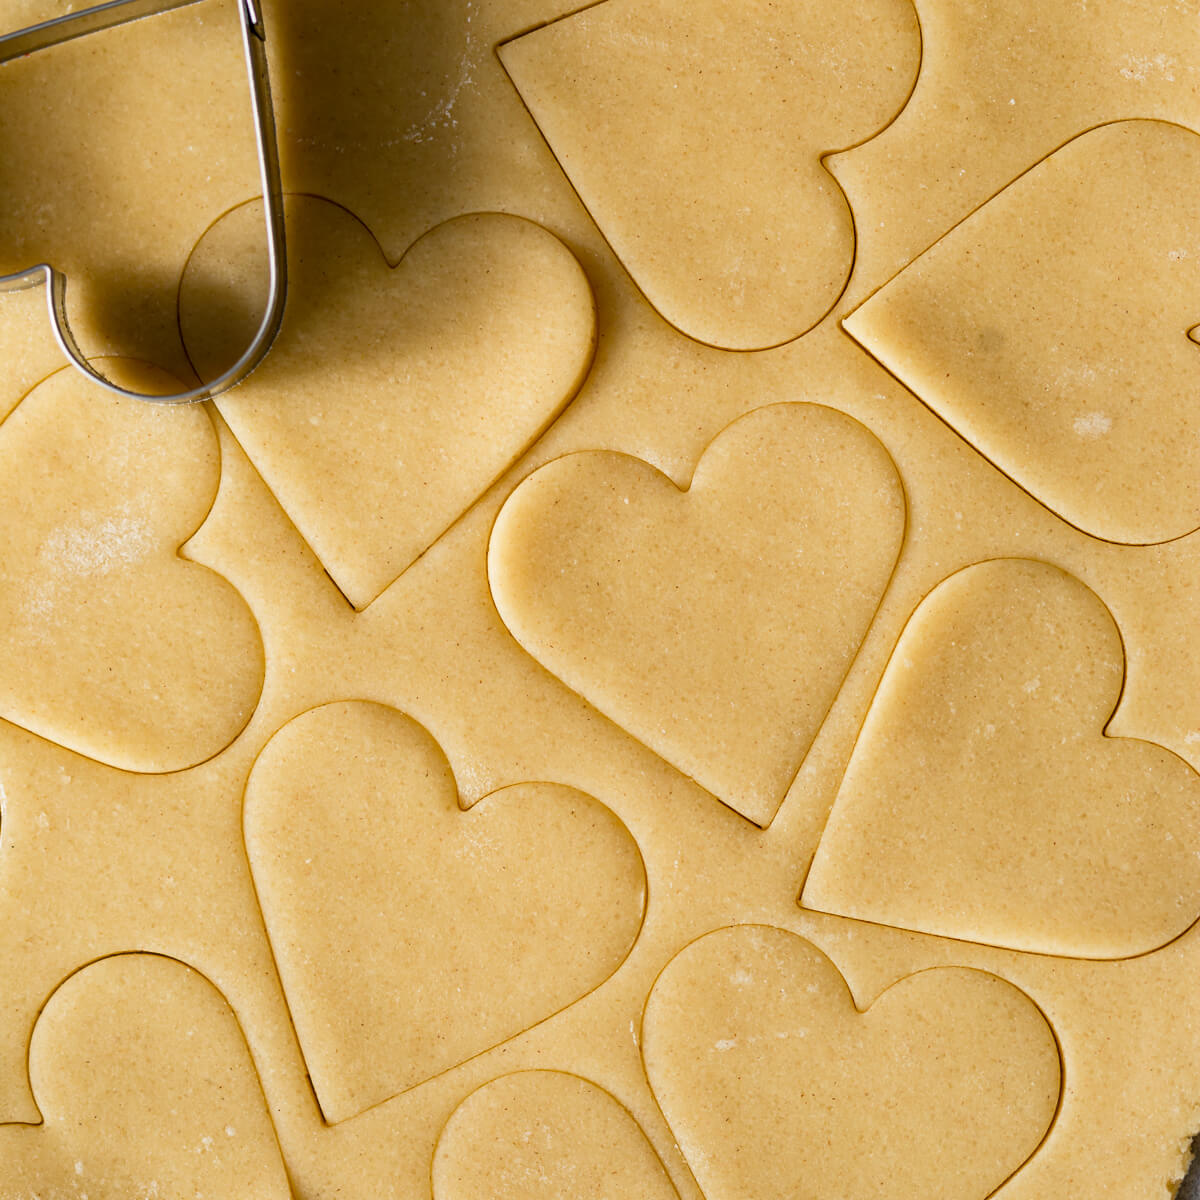 sugar cookie dough with heart-shaped cut-outs.